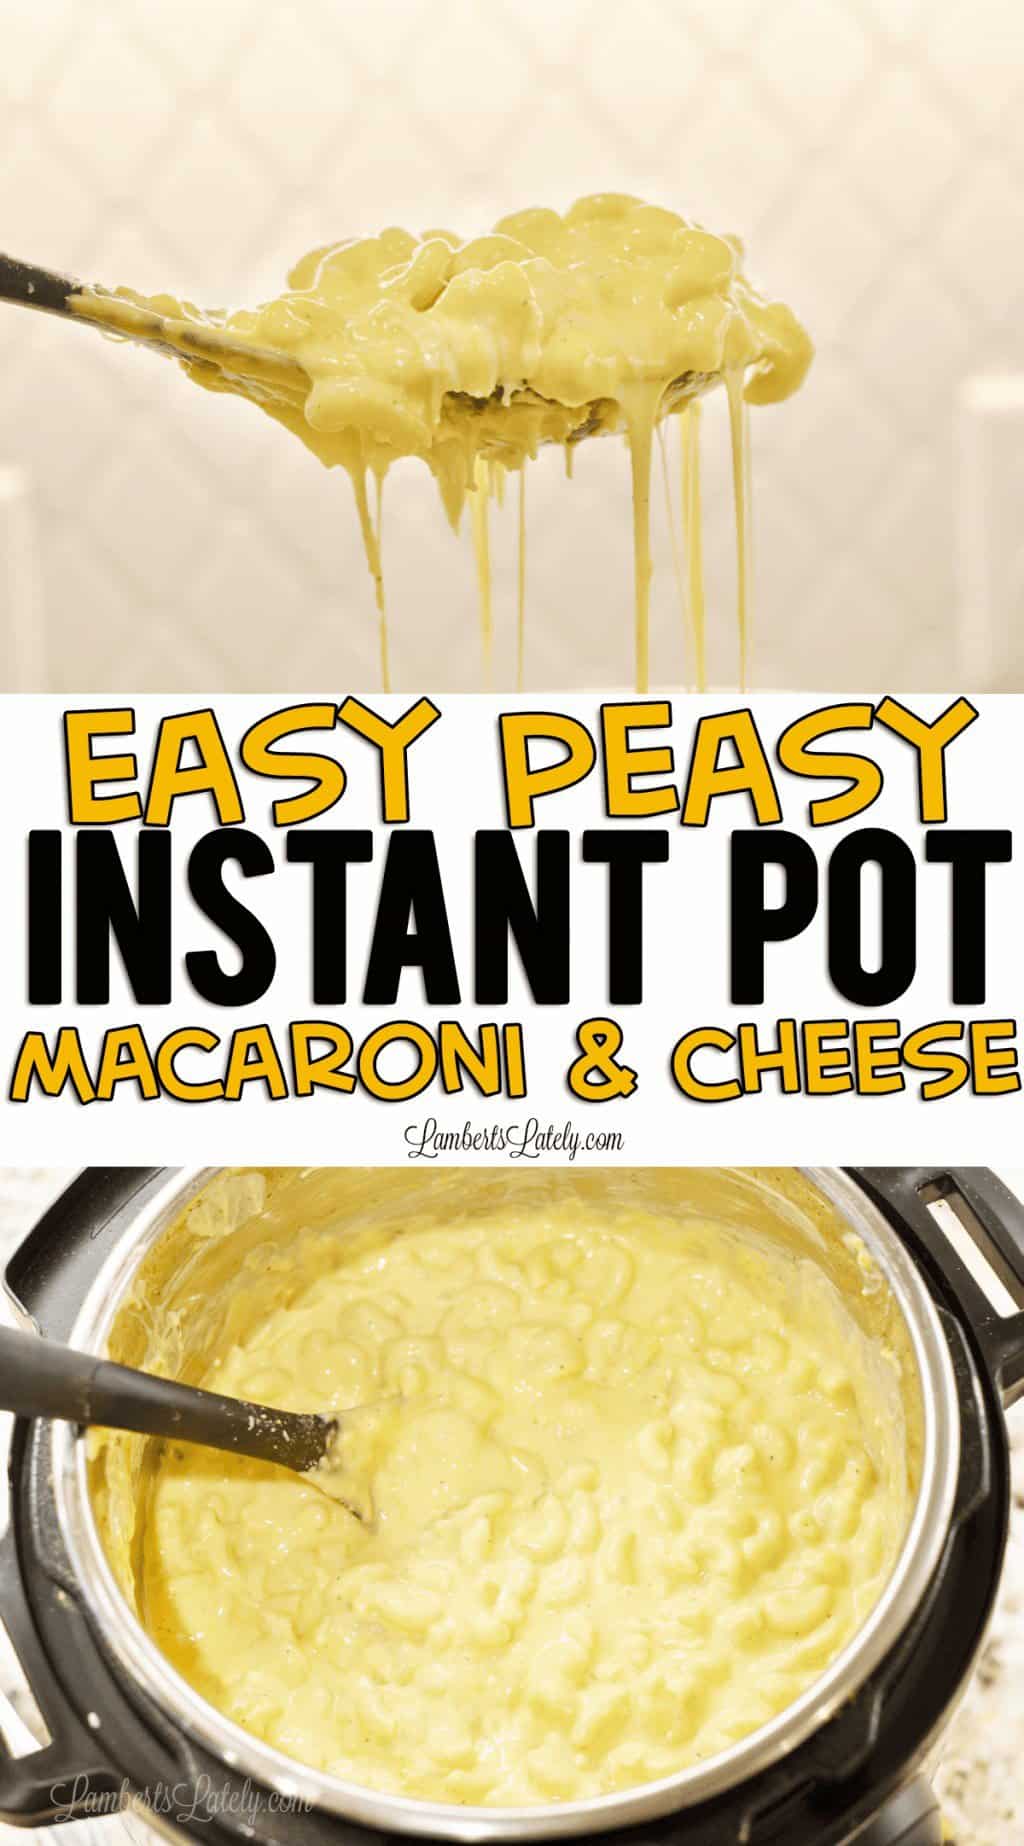 Easy Peasy Instant Pot Macaroni and Cheese